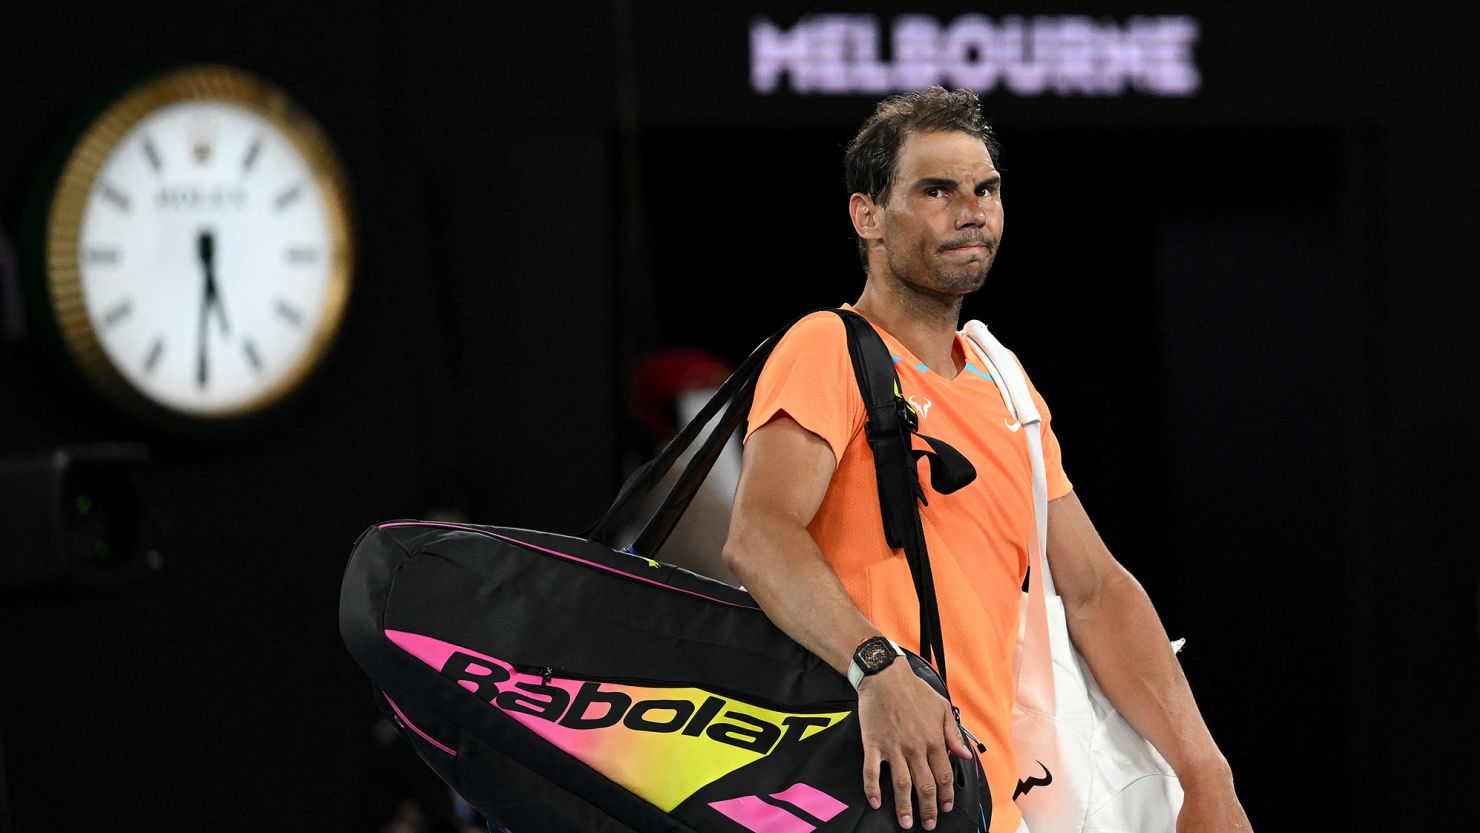 Rafael Nadal suffered a hip injury against Mackenzie McDonald in the Australian Open second round.